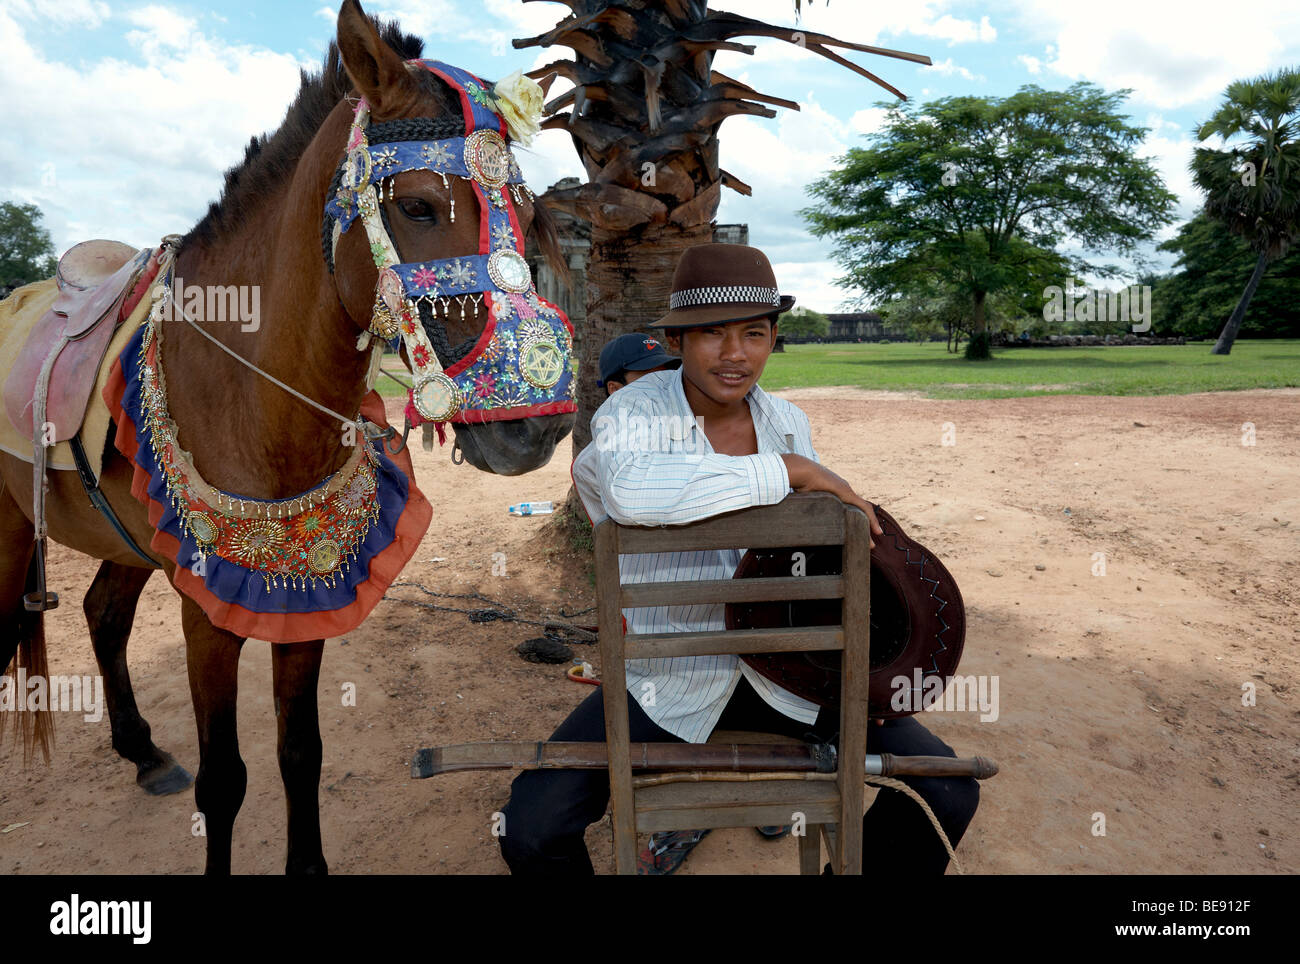 Horse ride attraction at Angkor Wat Siem Reap Cambodia S. E. Asia Stock Photo